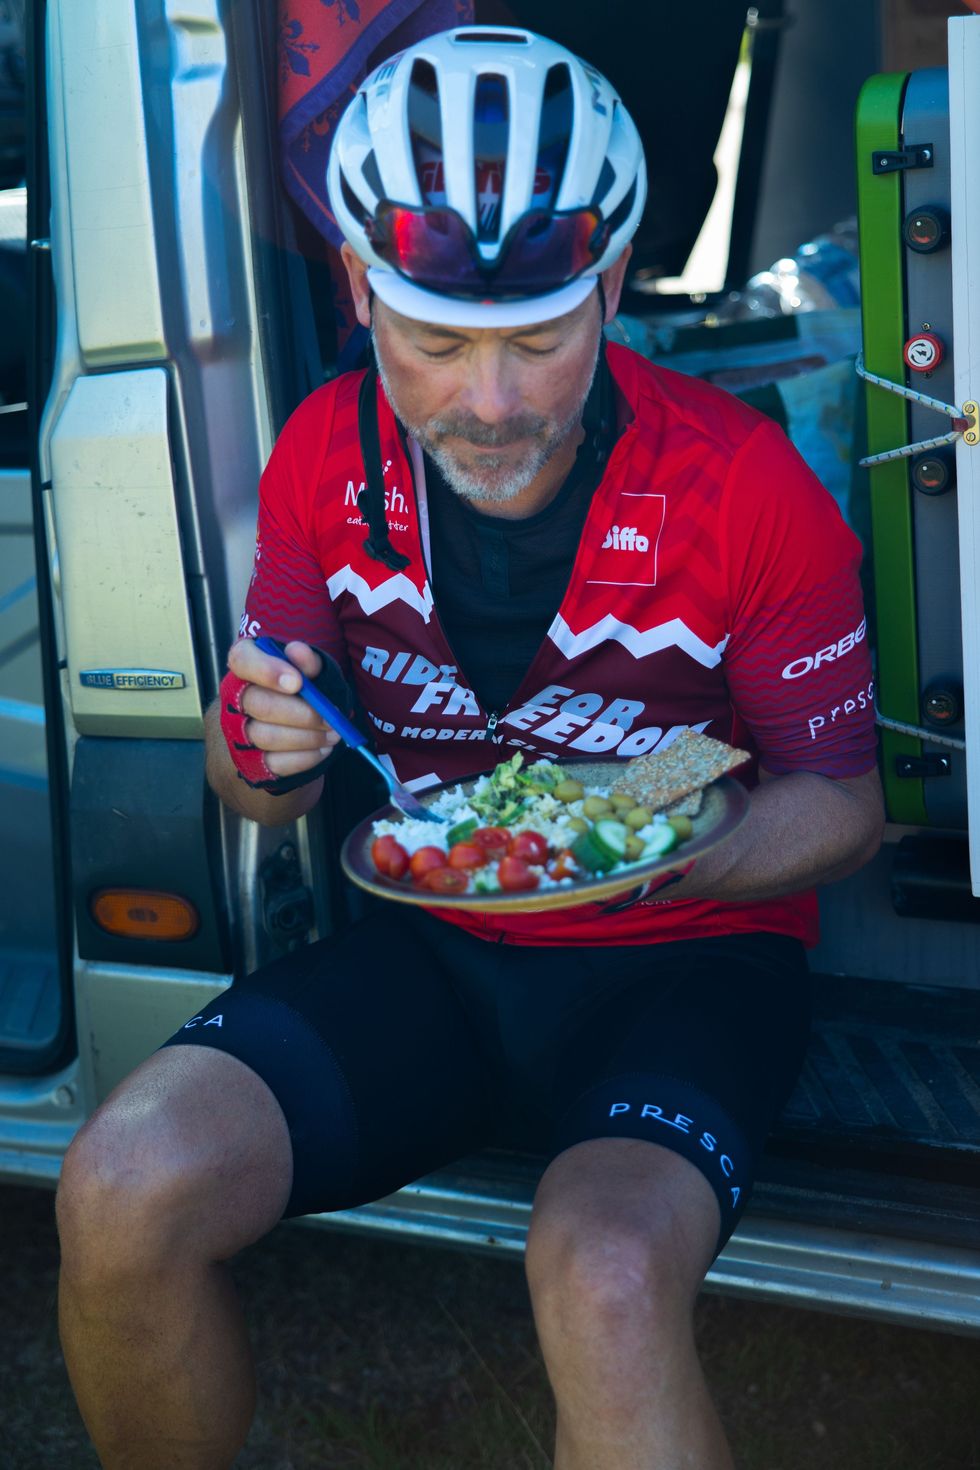 Mr Miller resting and fueling his body for the cycle (James Aubry/PA).